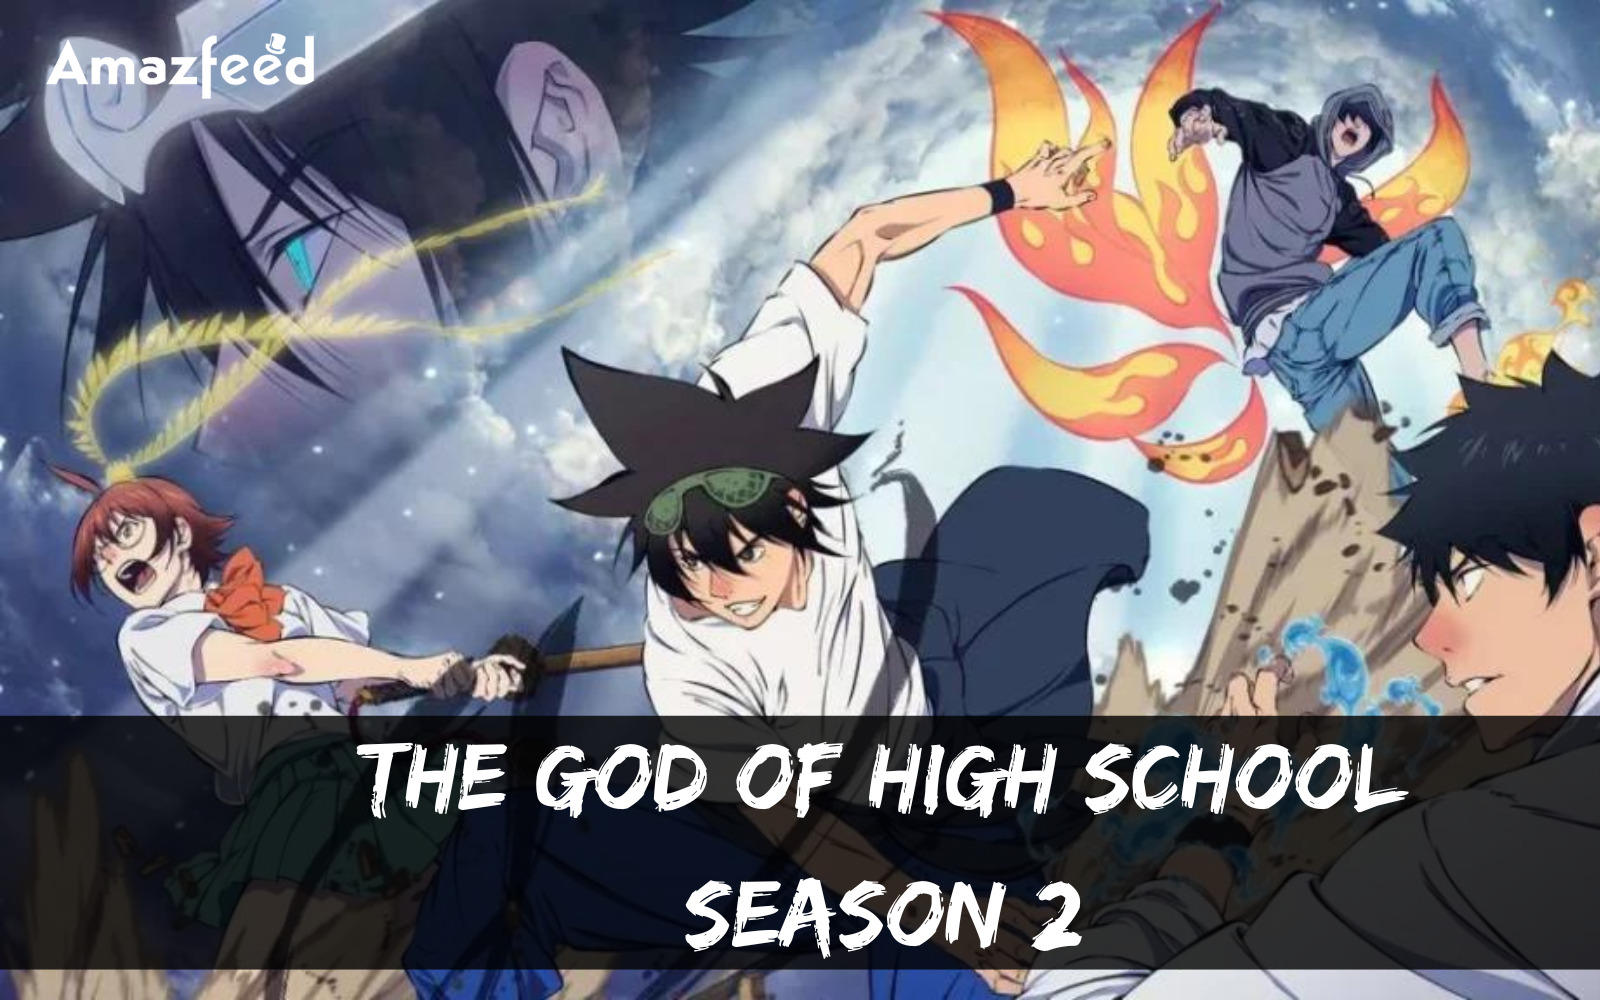 Who Will Be Part Of The God of High School Season 2 (Cast and Character)